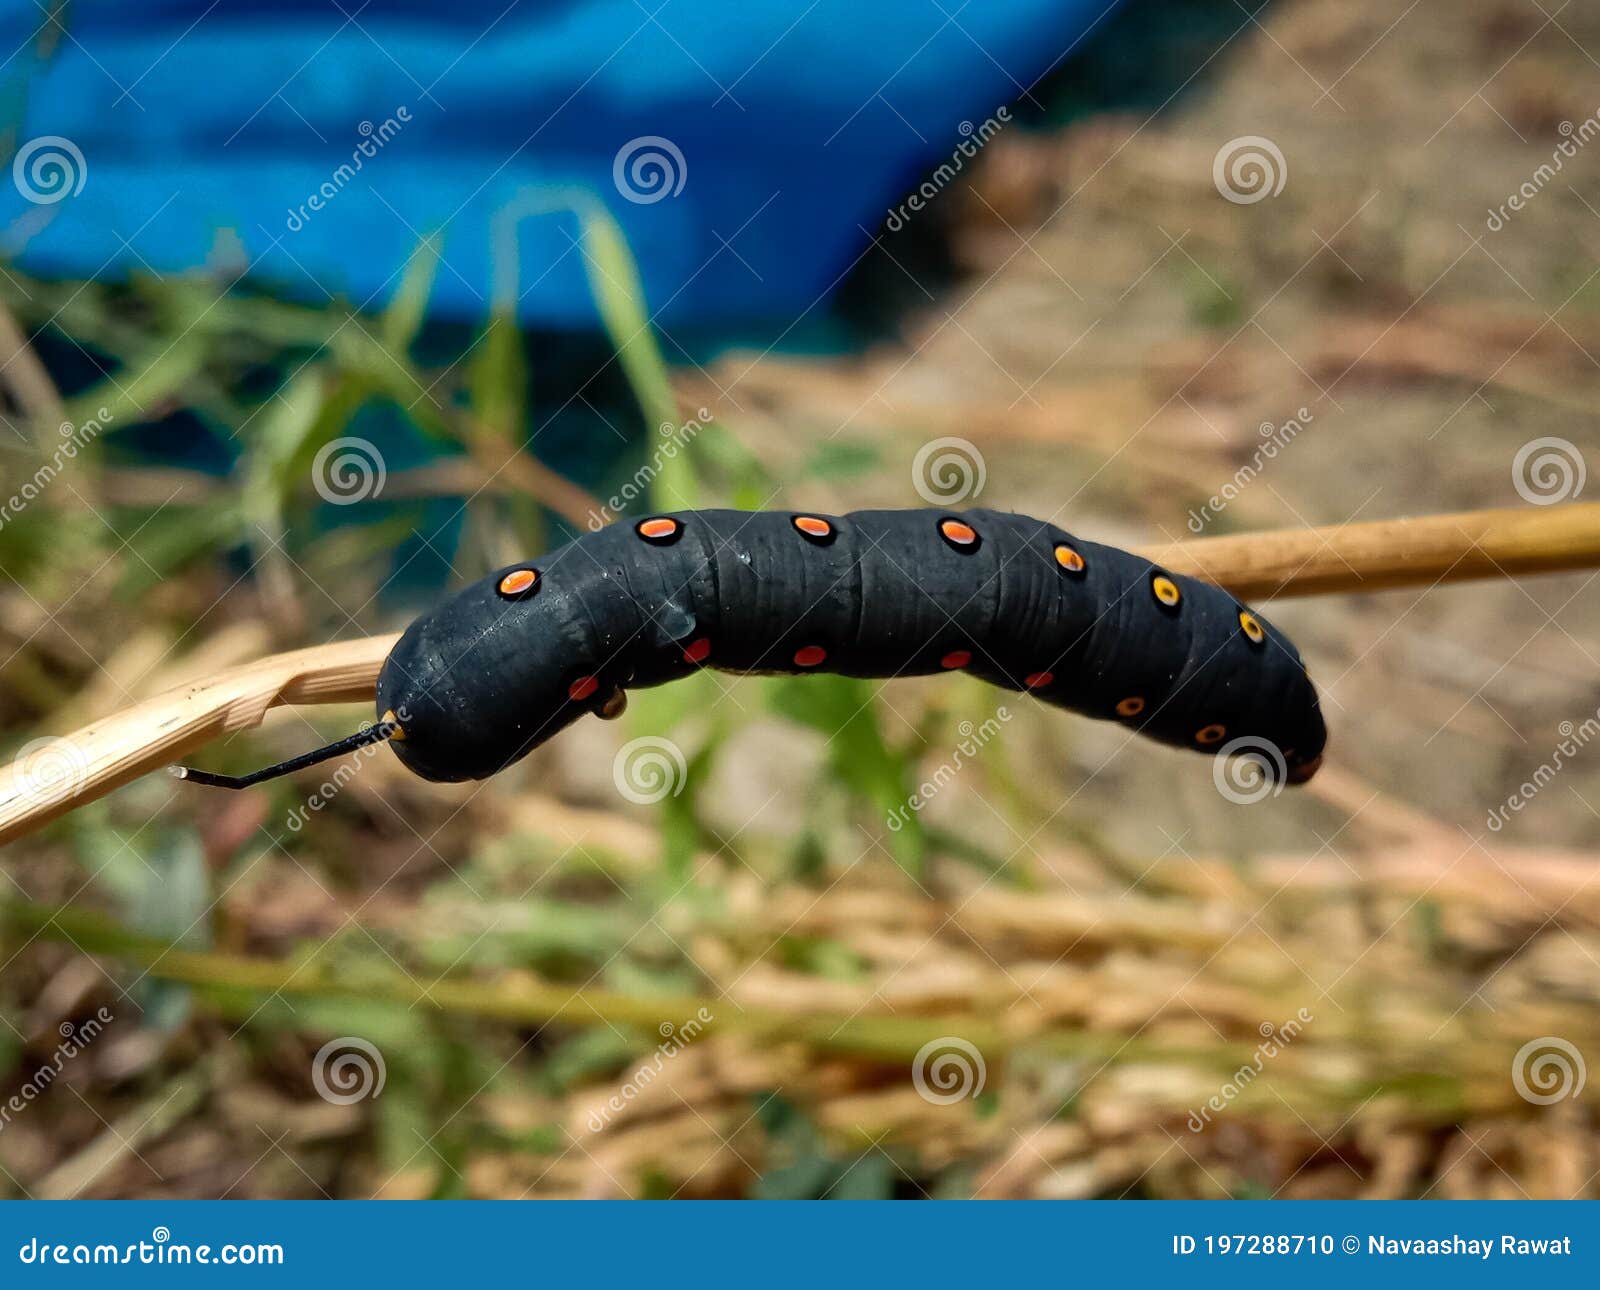 Unknown Smooth Black Hairless Caterpillar With Orange And Yellow Dots Stock Photo Image Of Climbing Native